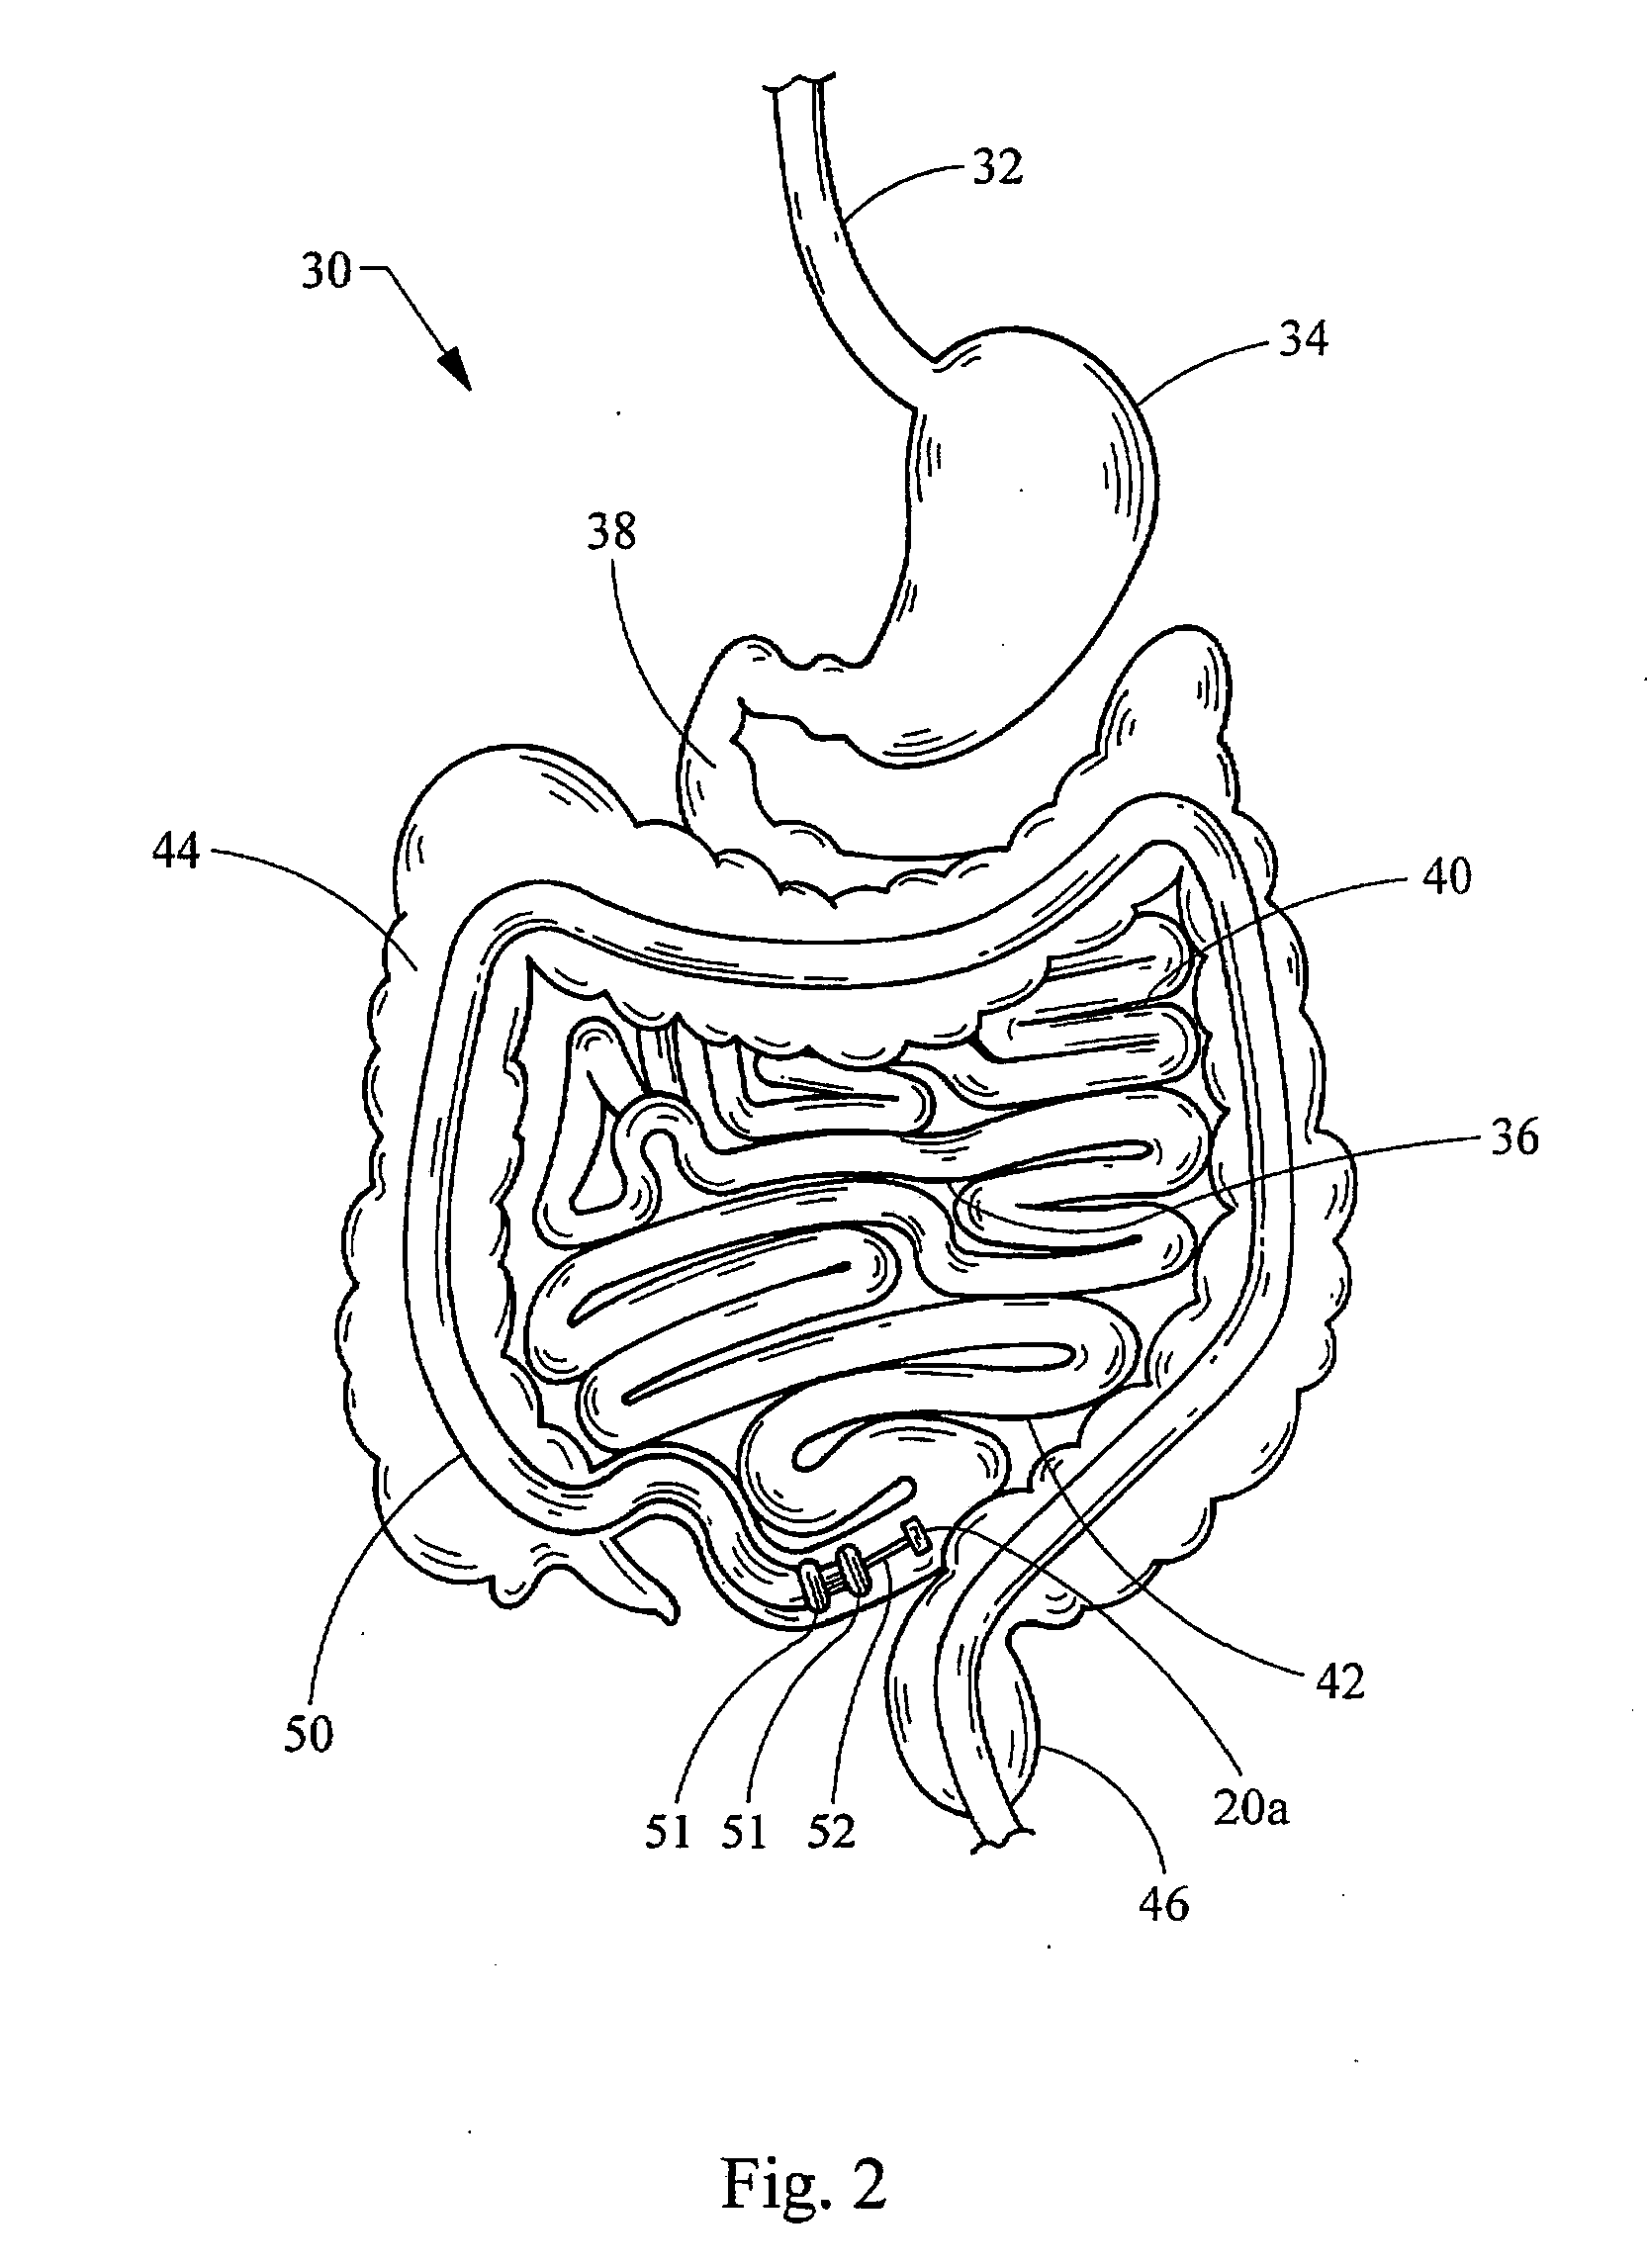 Intestinal bypass using magnets